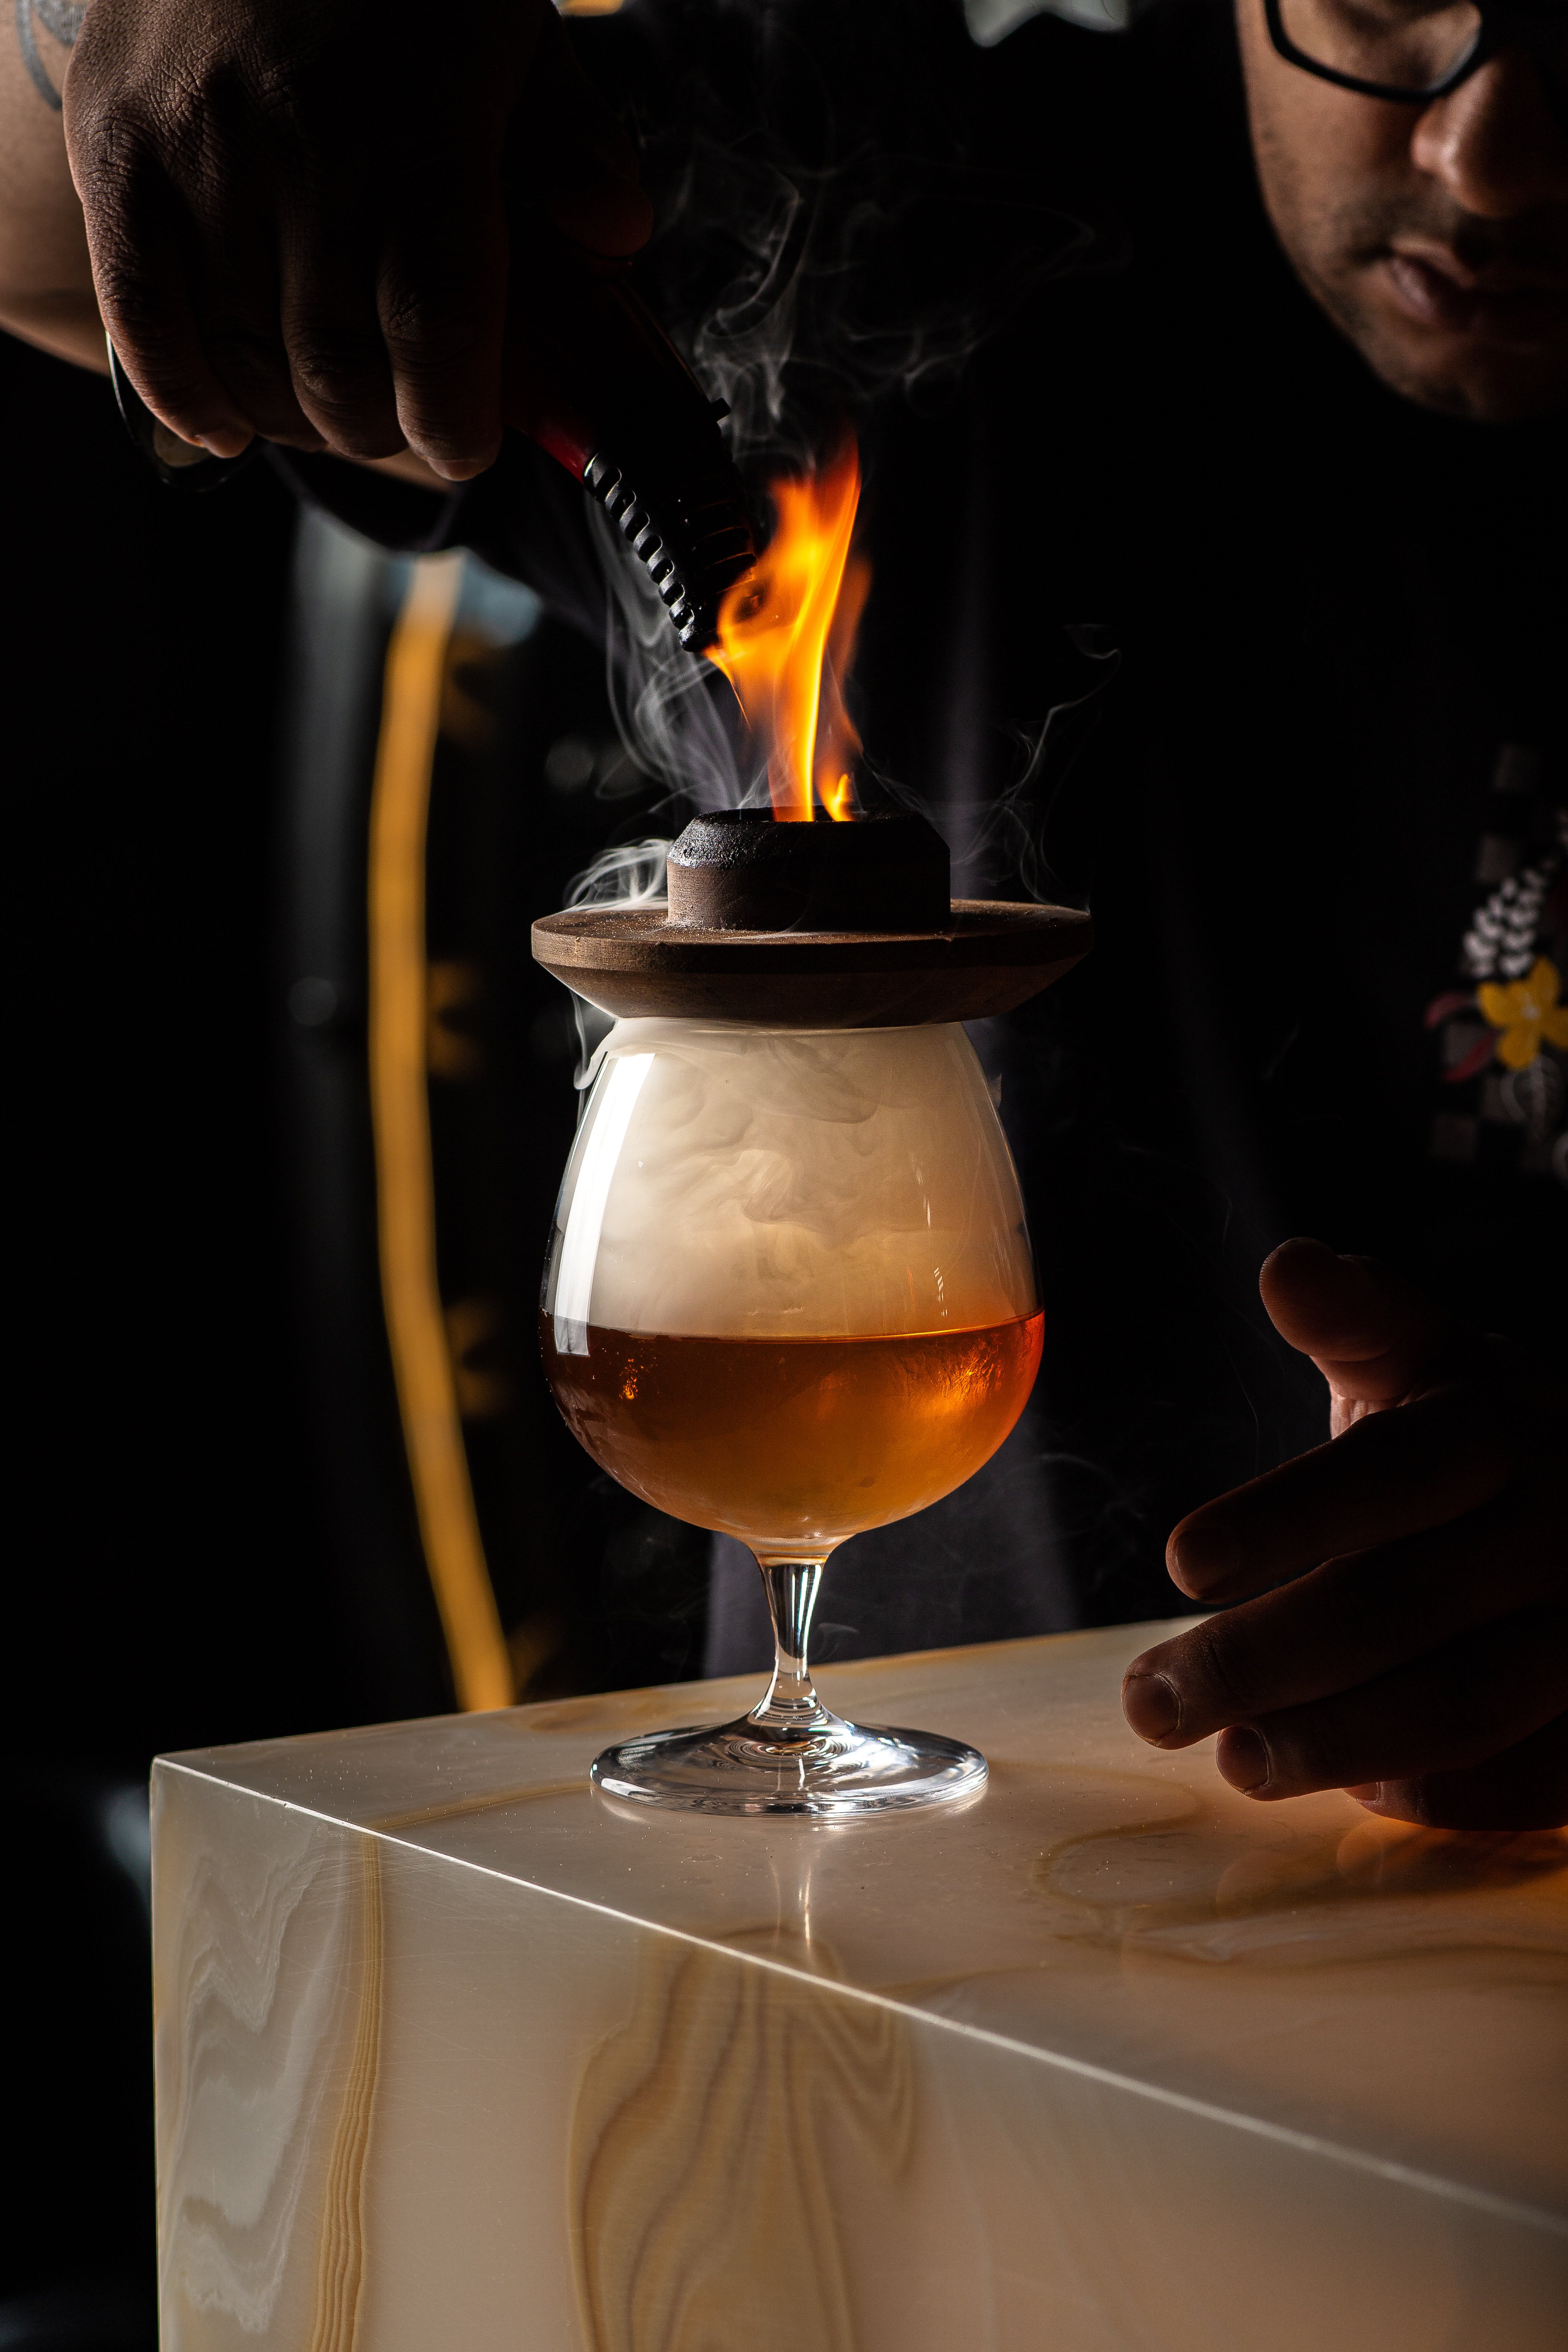 Want To Spice Up Your Cocktails? Learn To Add Heat Without Burning Your Fingers